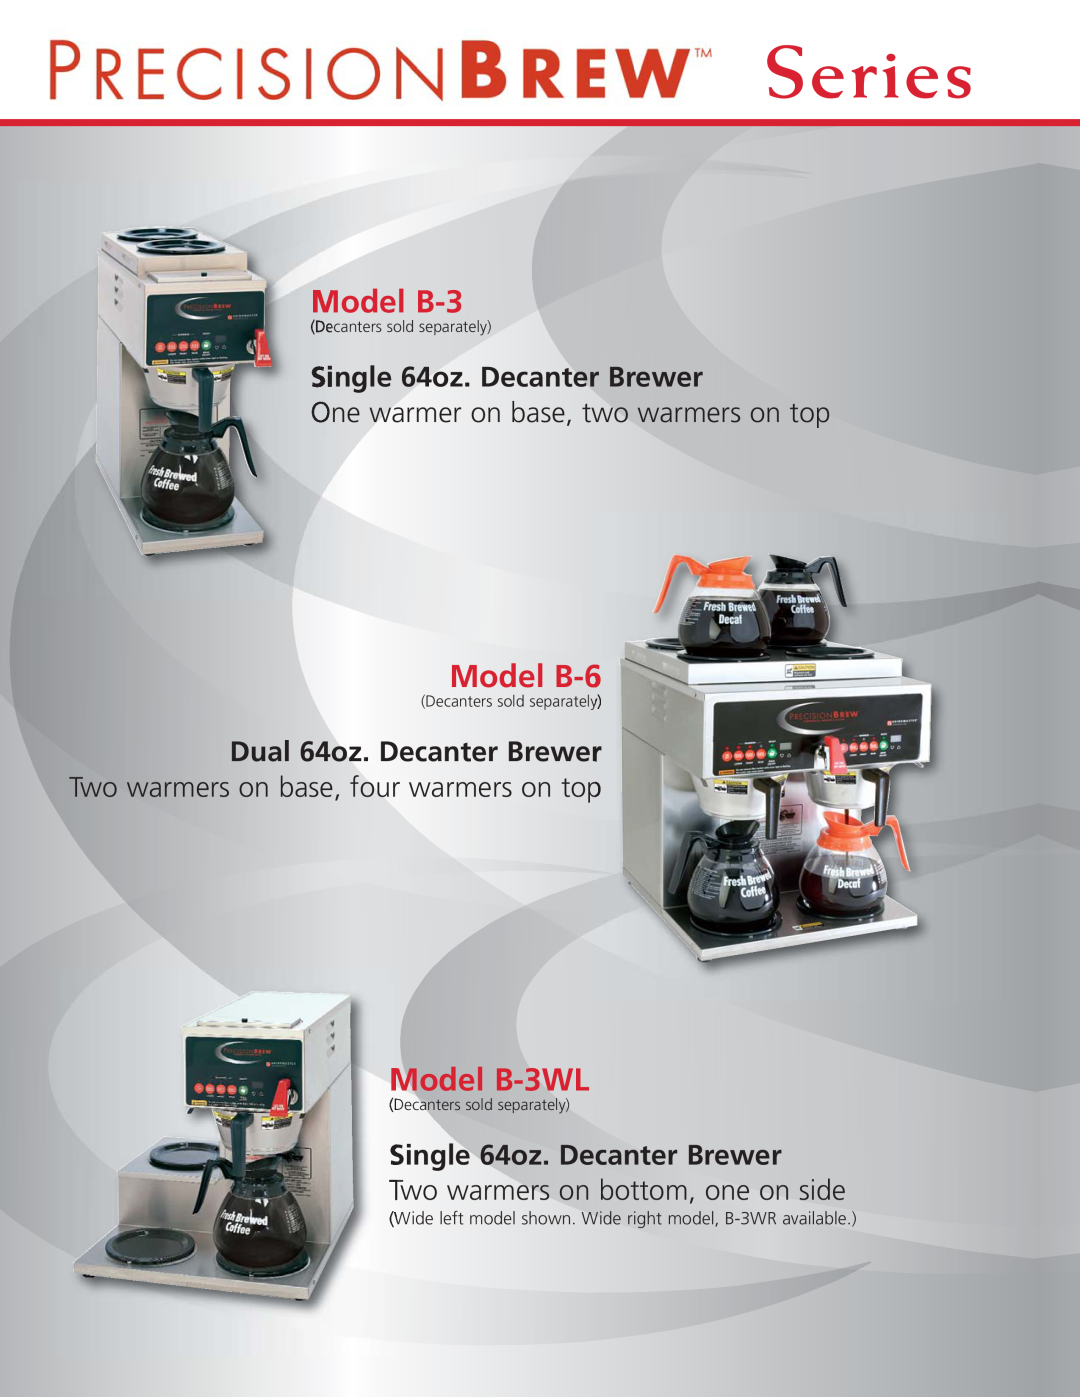 Grindmaster Model B-6, Model B-3WL, Single 64oz. Decanter Brewer, One warmer on base, two warmers on top, Series 